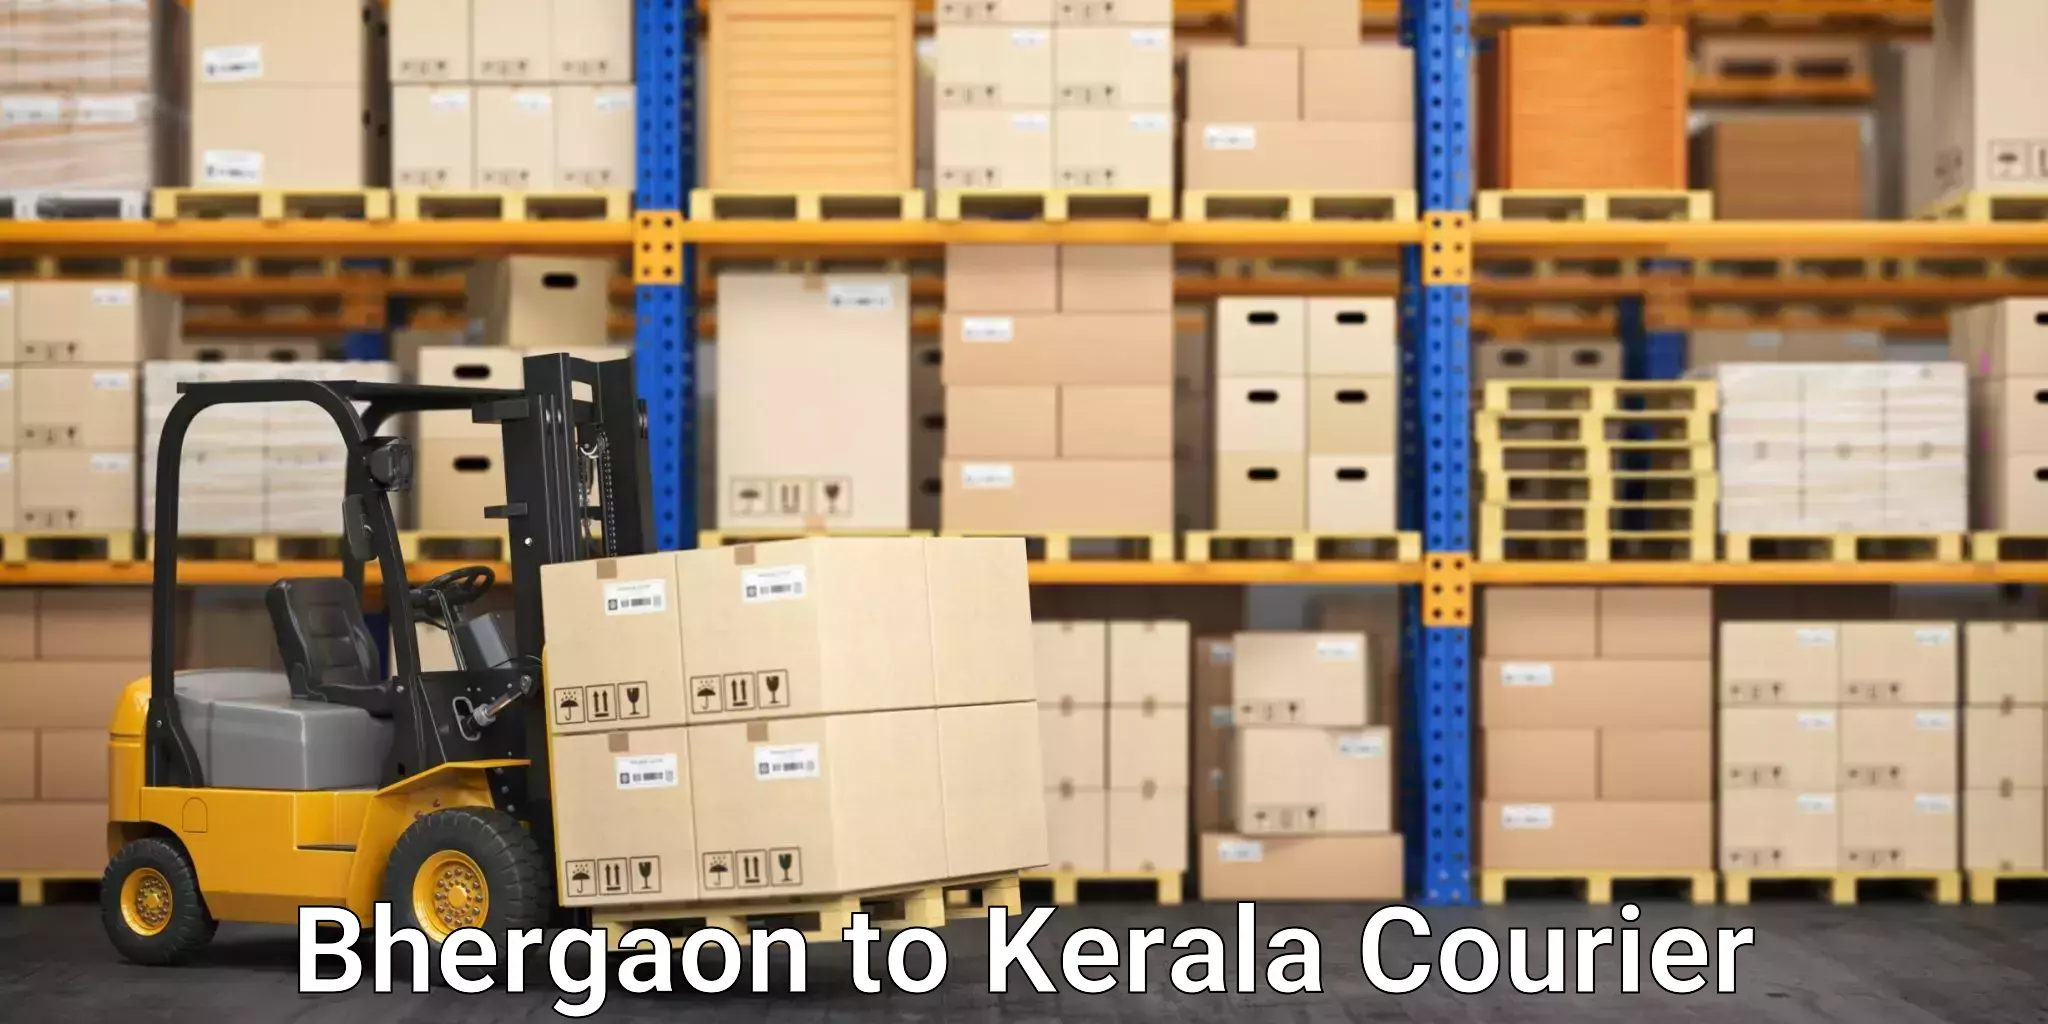 Global logistics network Bhergaon to Cochin University of Science and Technology